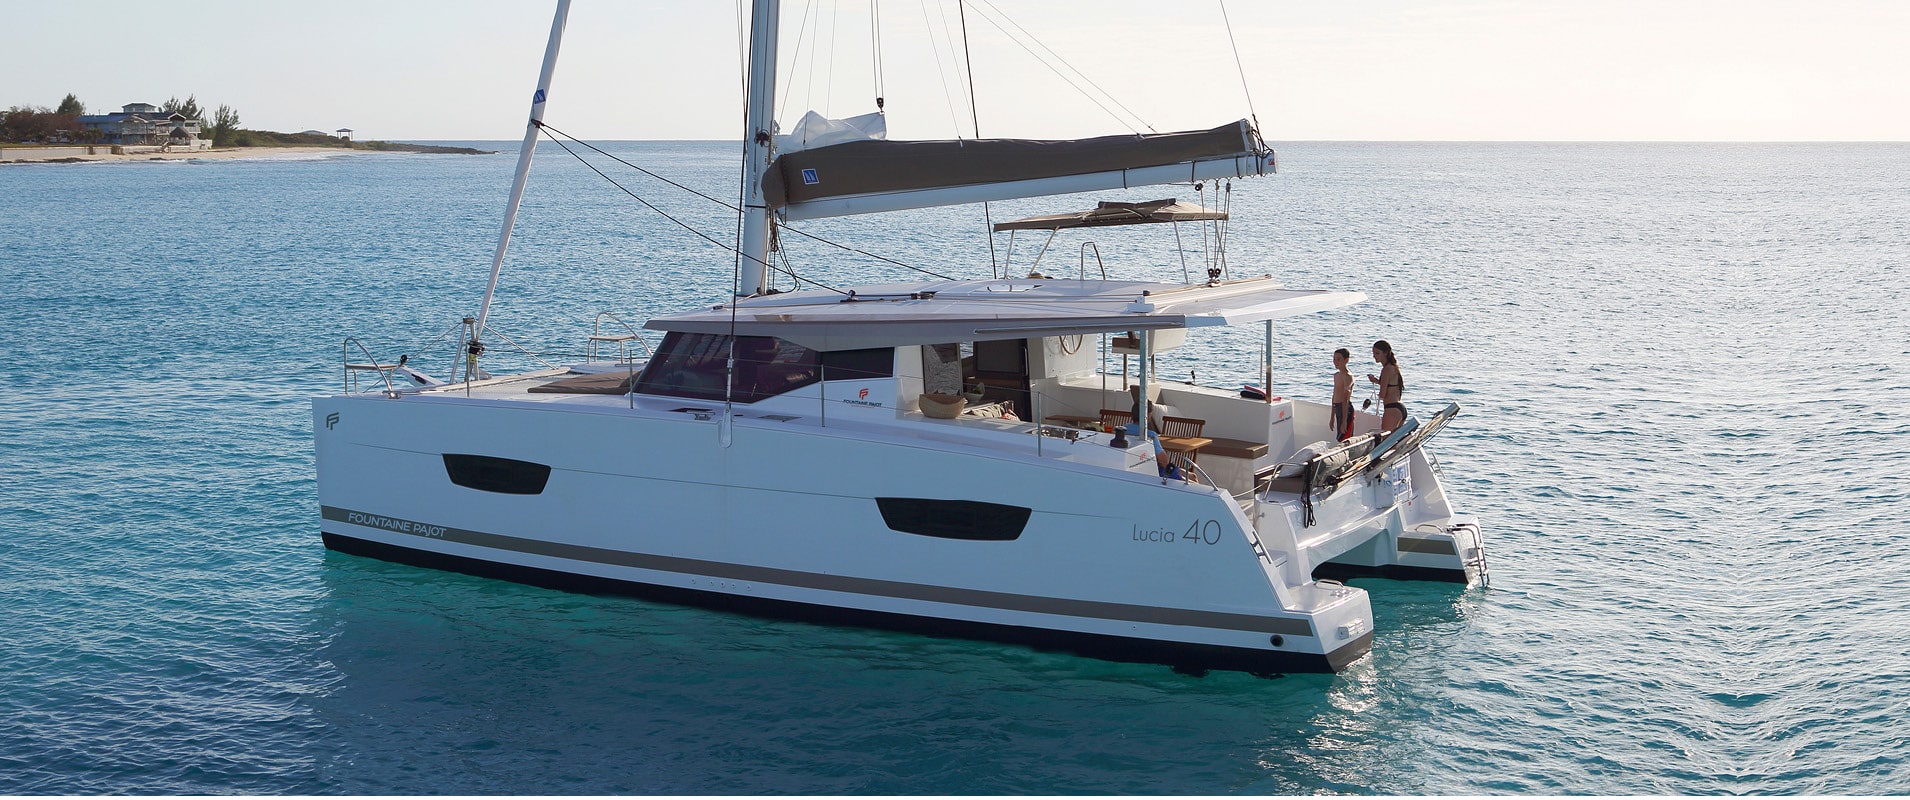 Fountaine Pajot Lucia 40 - Yacht Charter Rhodes & Boat hire in Greece Dodecanese Rhodes Rhodes Marina 1